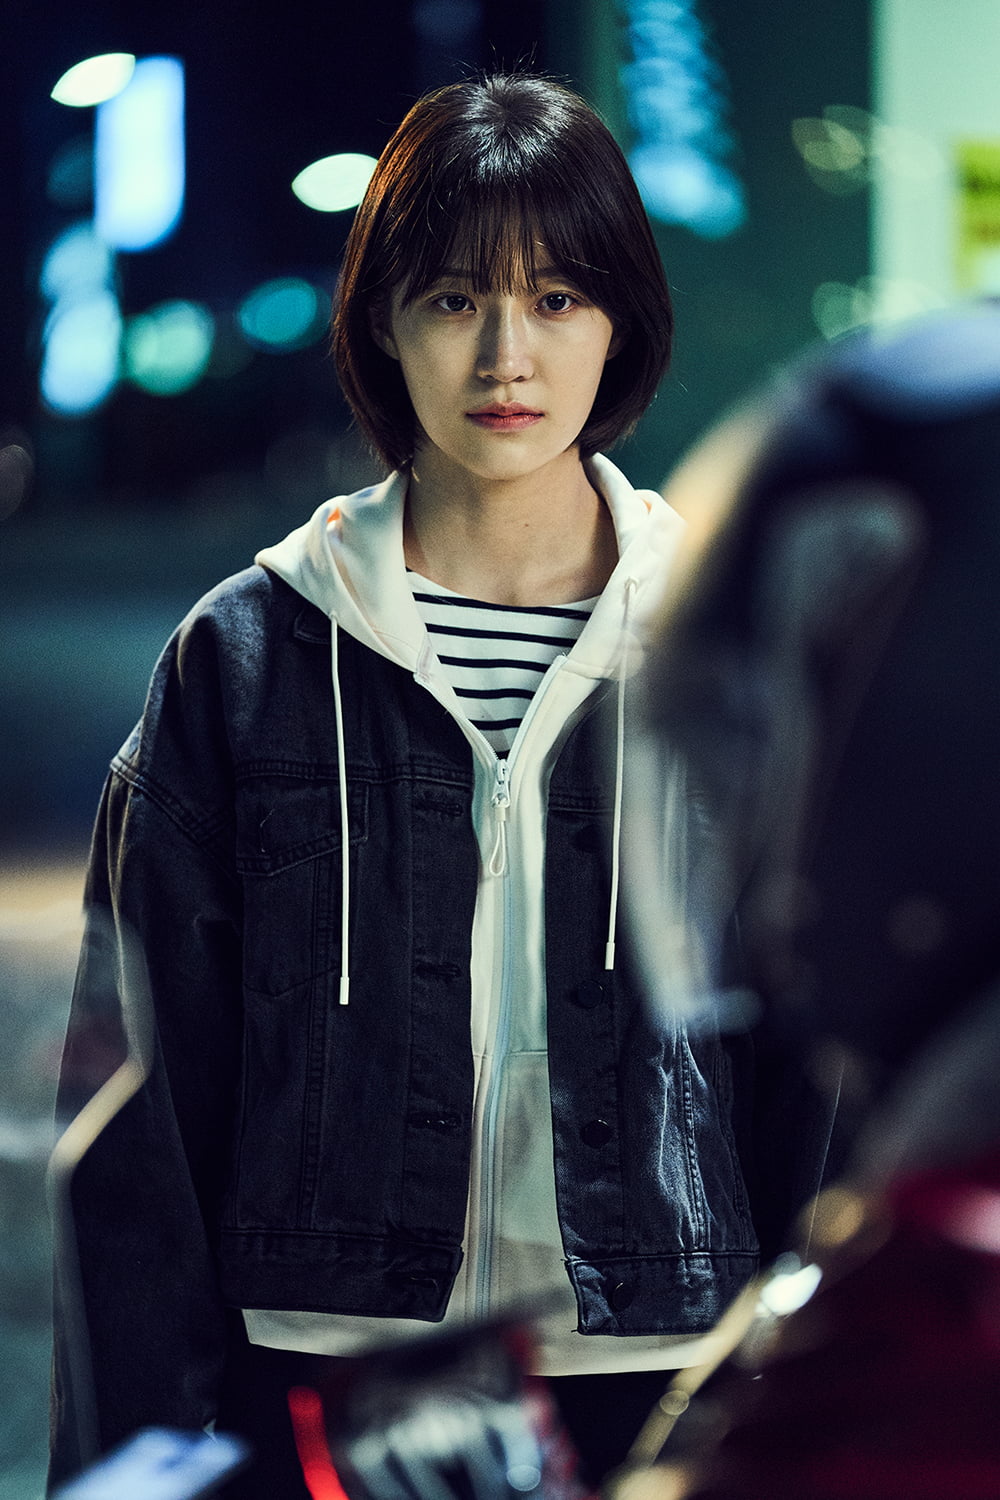 Seo Ji-hye, from 'Heart Signal', debuts on screen in the movie 'The Wild: War of the Beasts'